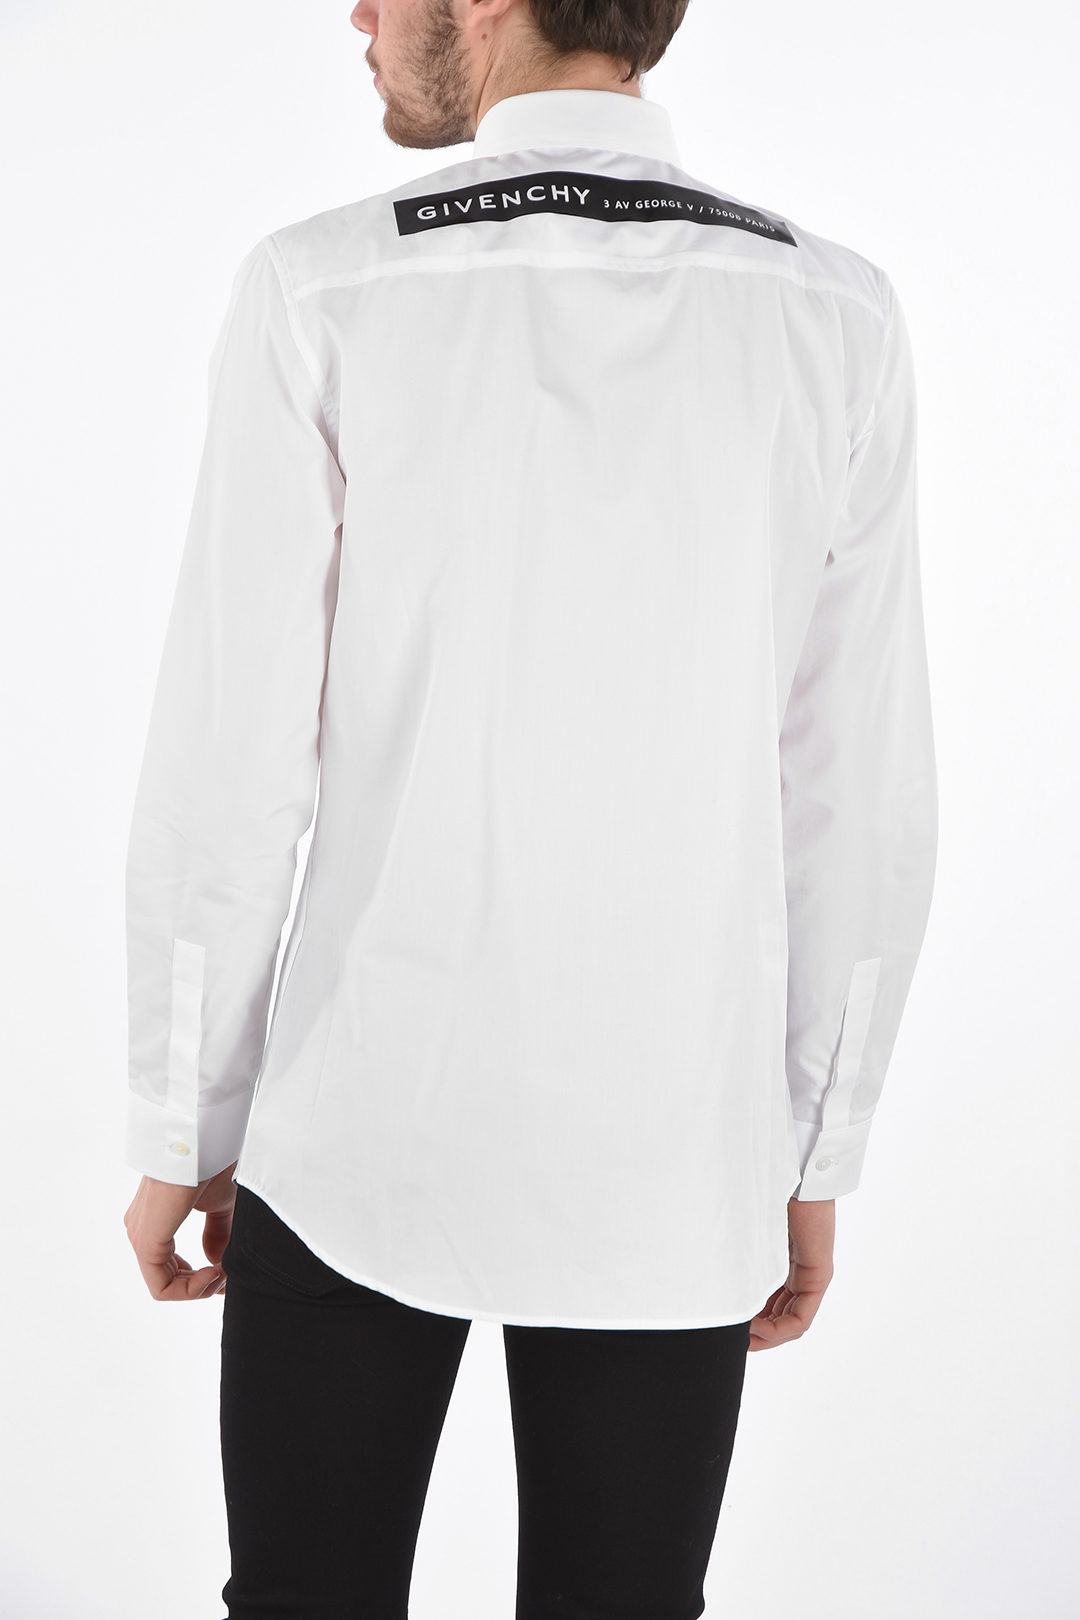 Givenchy Cotton Shirt with Standard Collar and Print men - Glamood Outlet